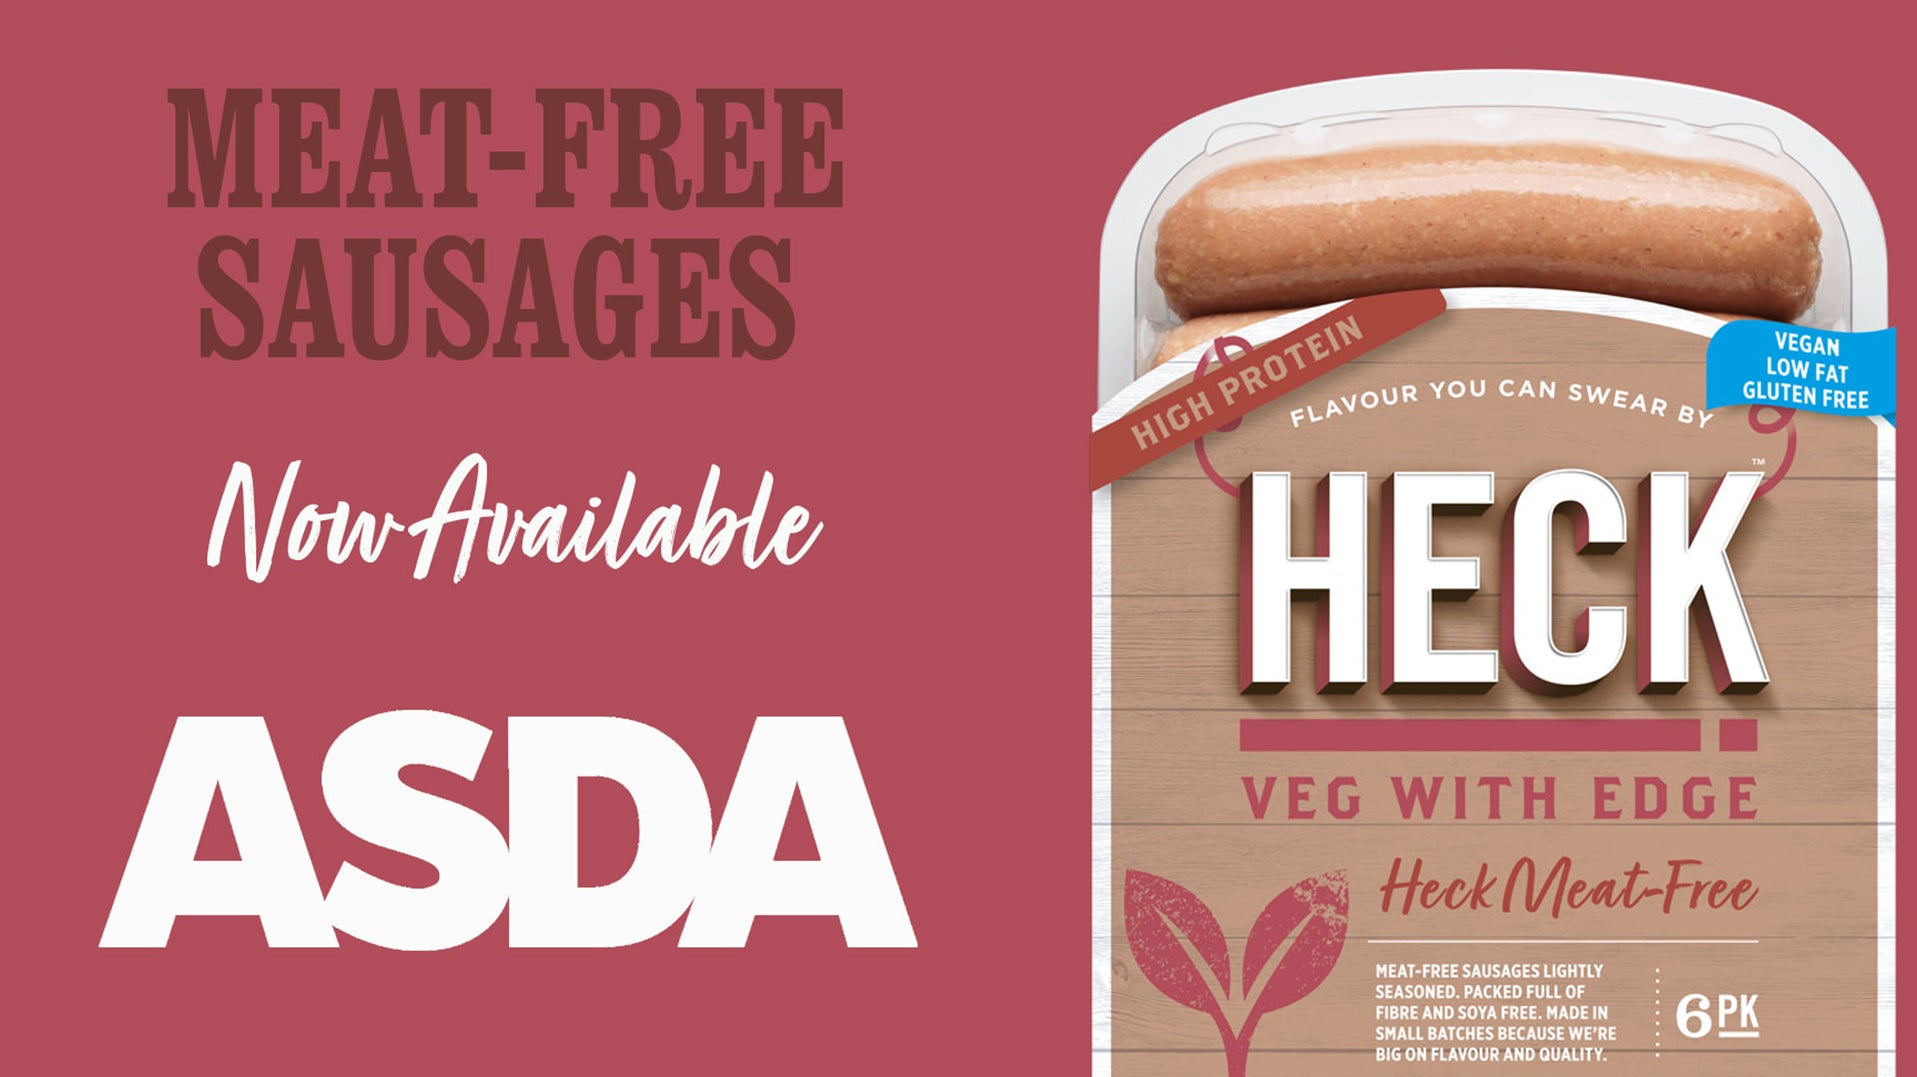 Buy HECK Meat-Free Sausages In Asda Now!